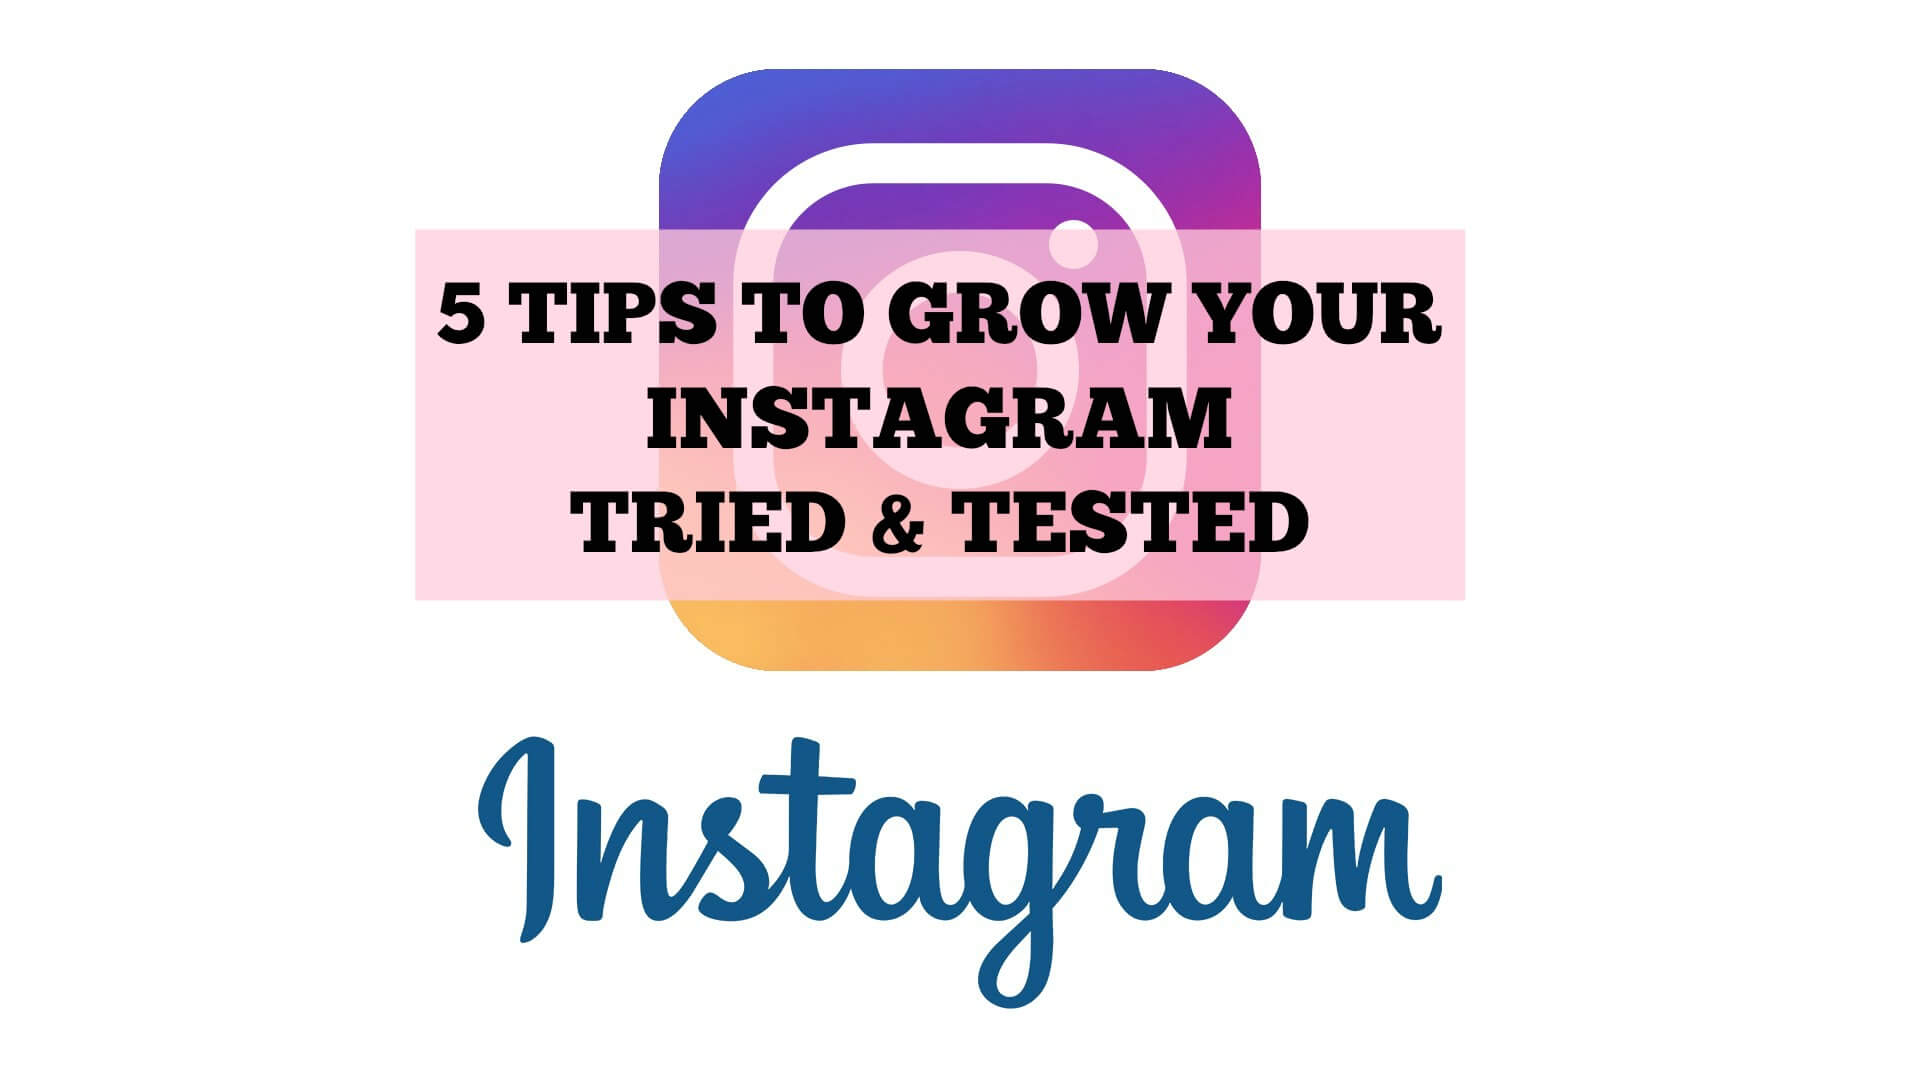 5 tips to grow your Instagram tried and tested